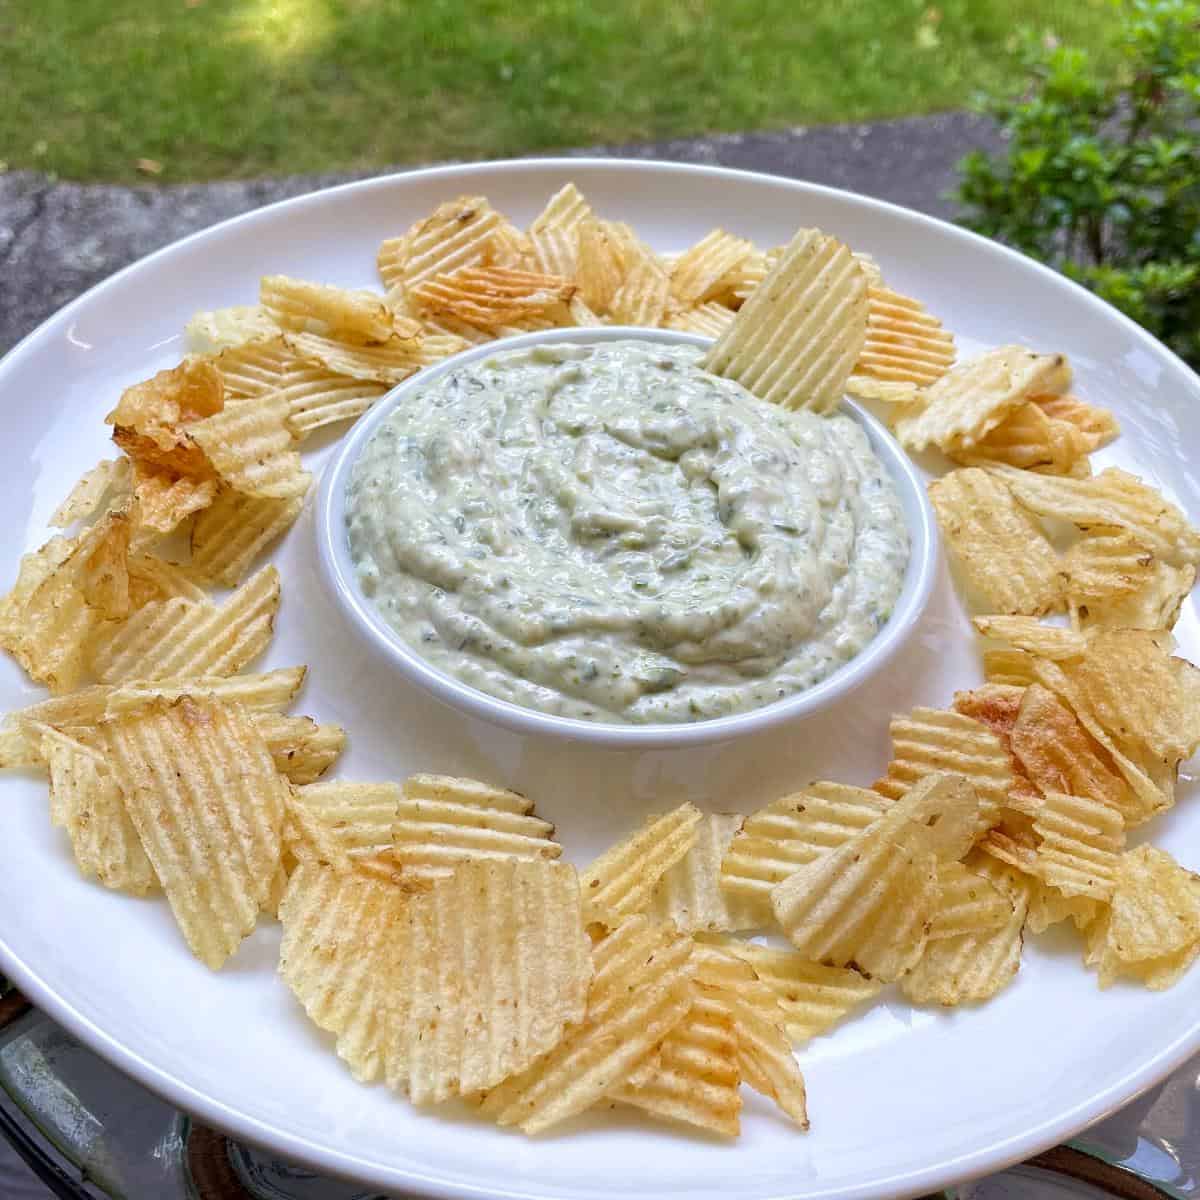 roasted asparagus dip served outside in a dip bowl, along with potato chips.